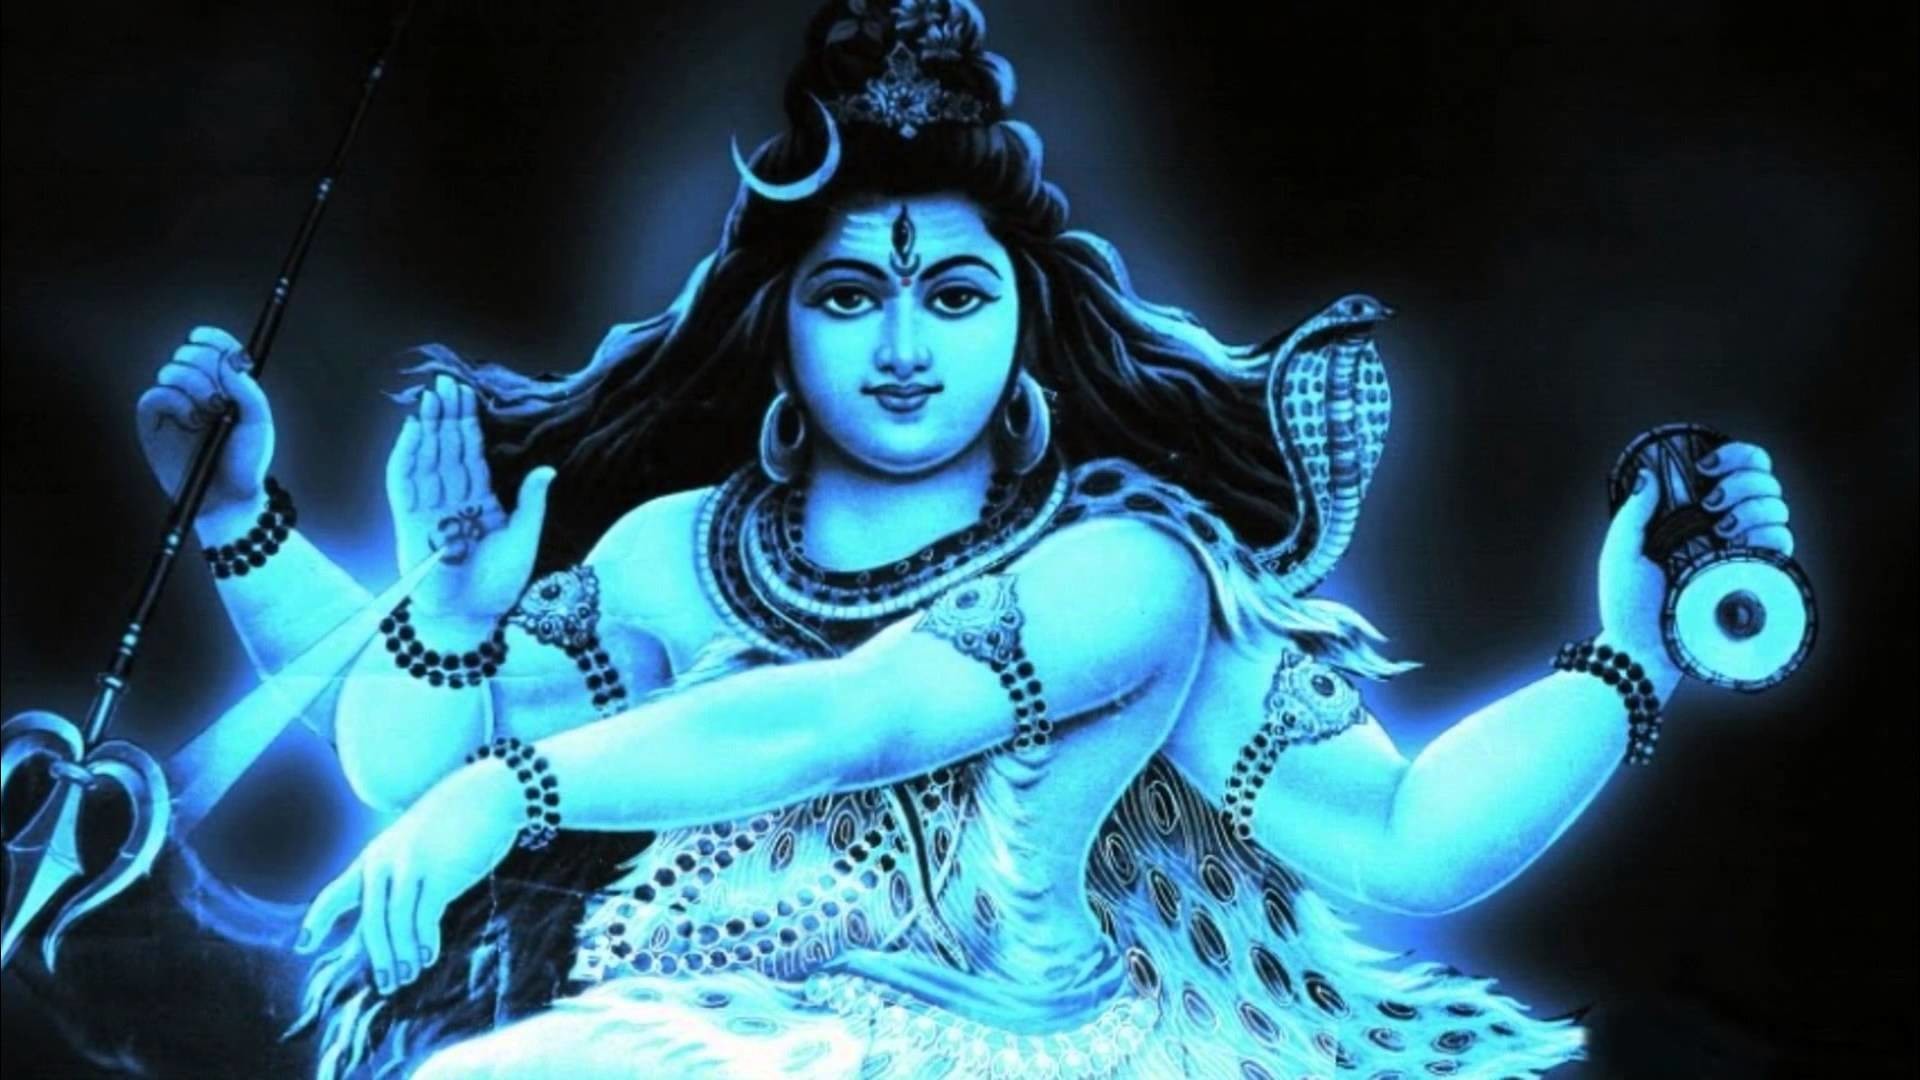 1920x1080 Lord Shiva Images Wallpapers, HD Backgrounds